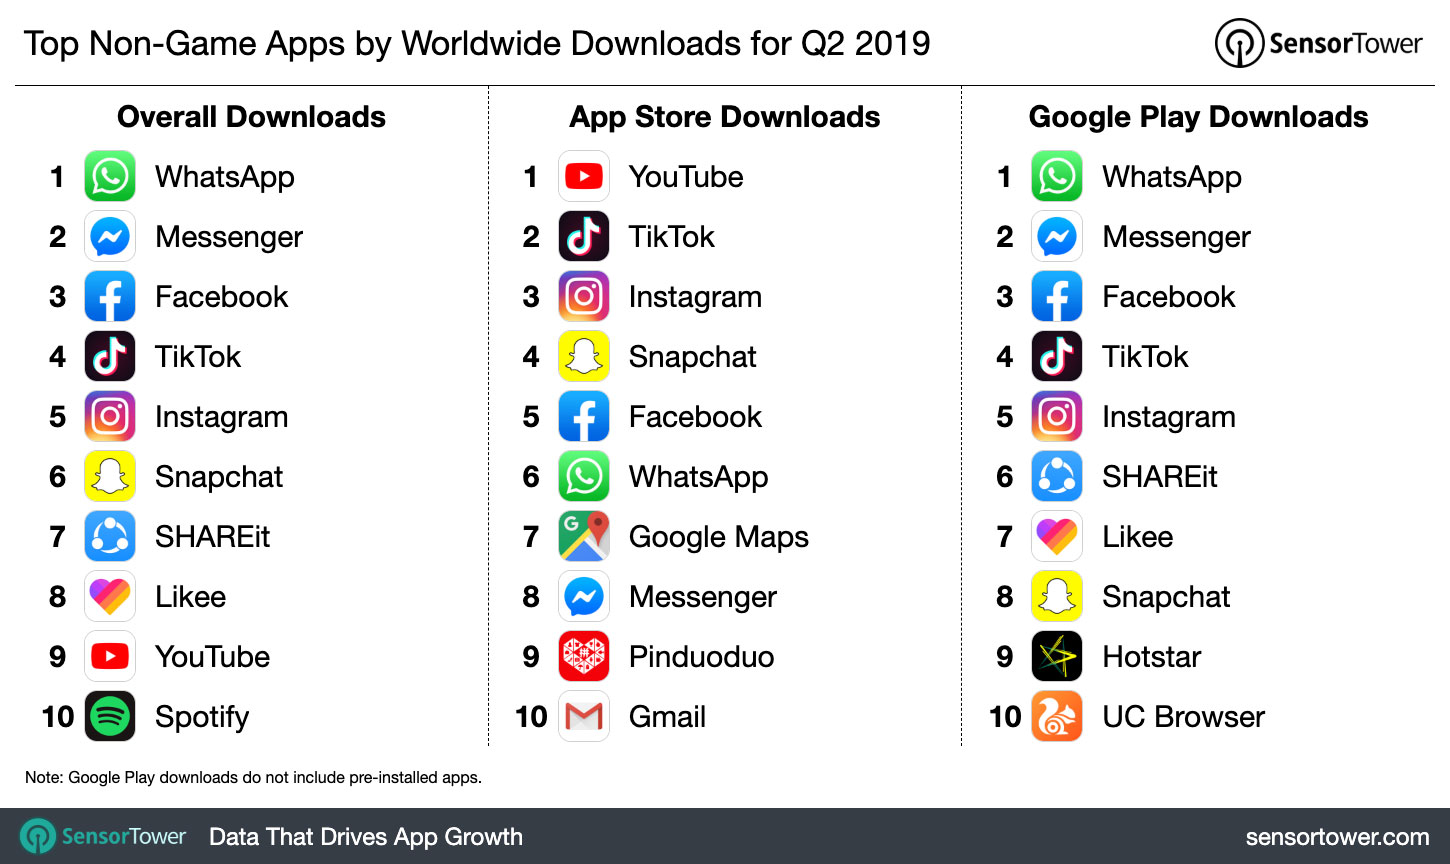 Chart showing the world's most downloaded iOS and Google Play apps for Q2 2019